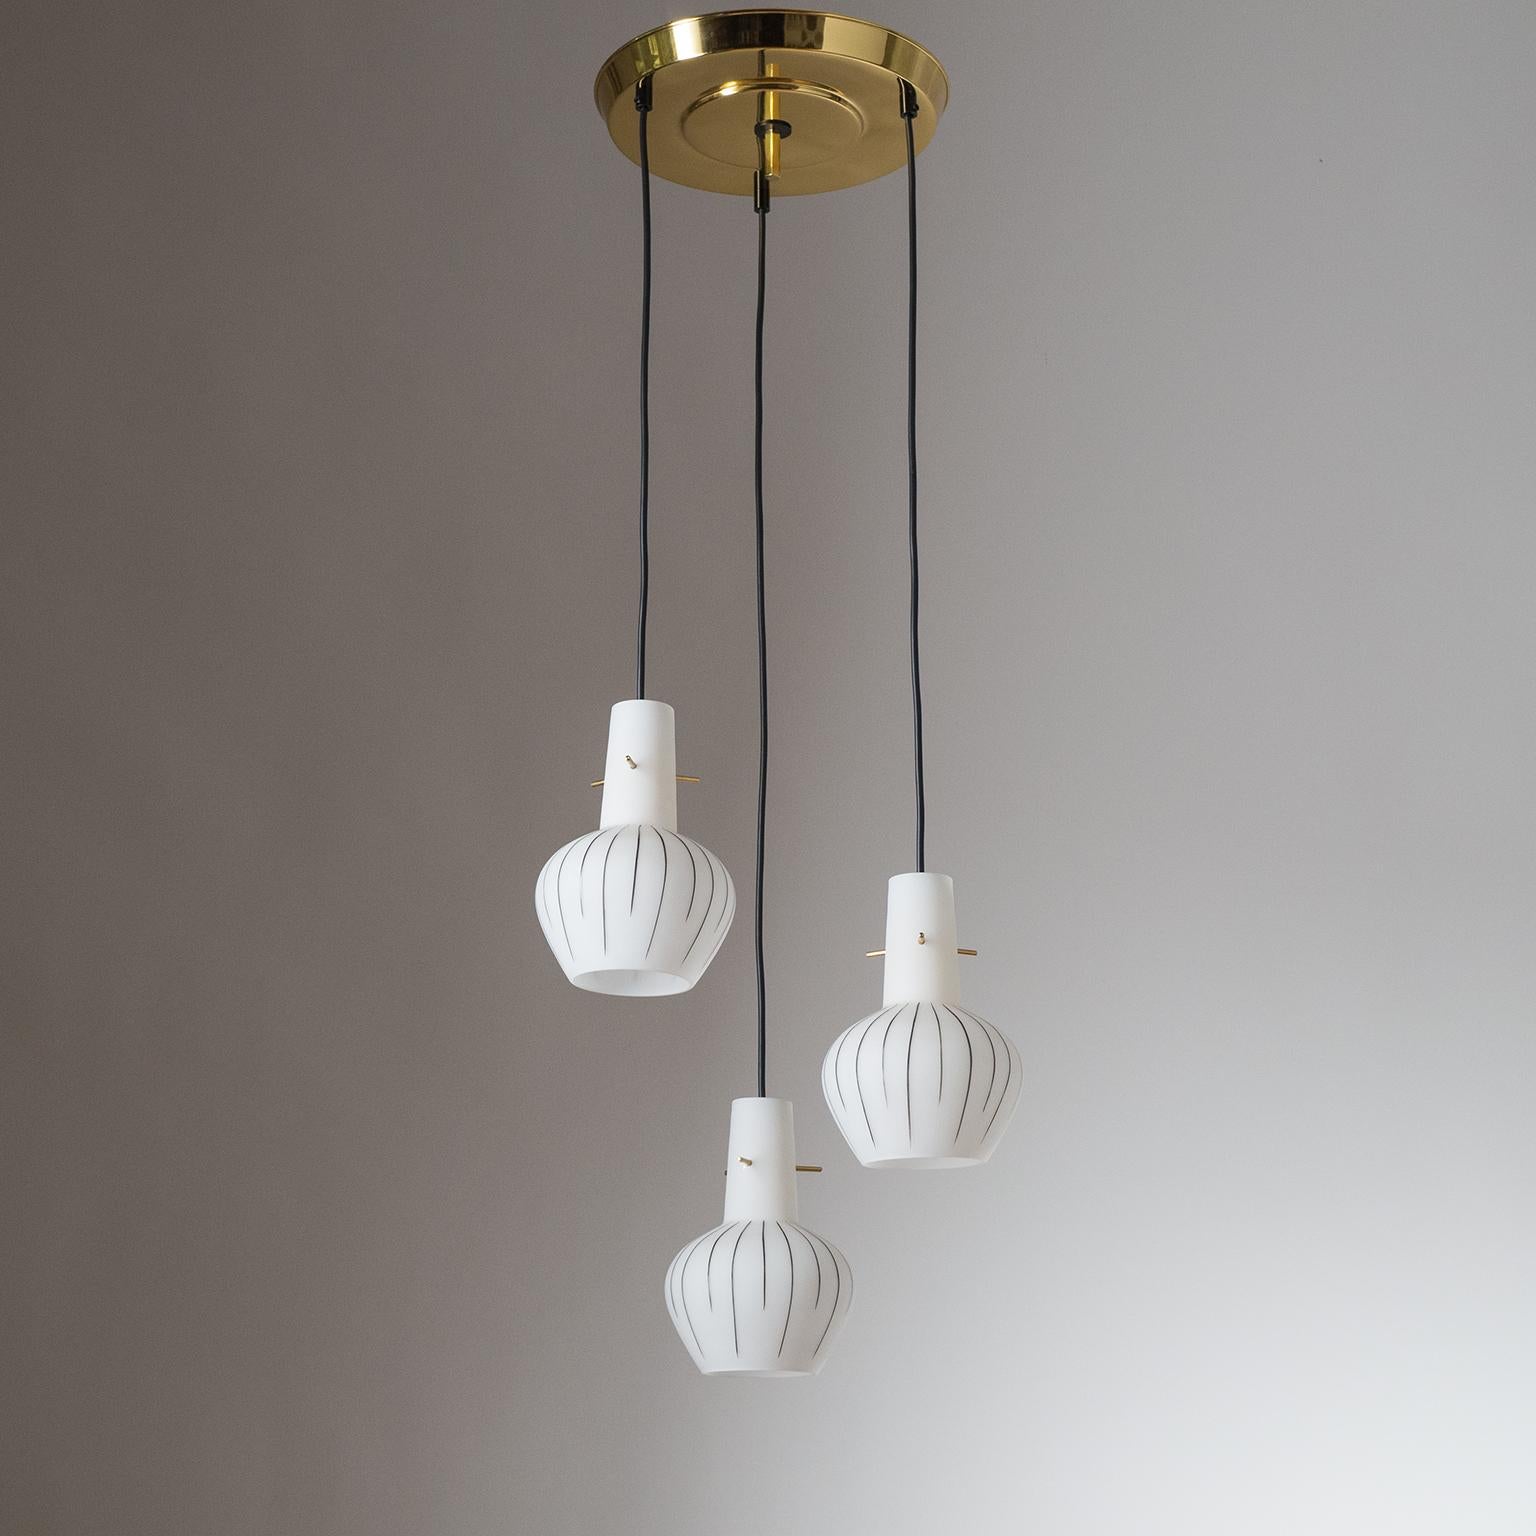 Italian cascading suspension chandelier from the 1960s. Suspended from a polished brass ceiling plate are three blown satin glass diffusers with hand-painted stripes. Original E14 sockets with new wiring.